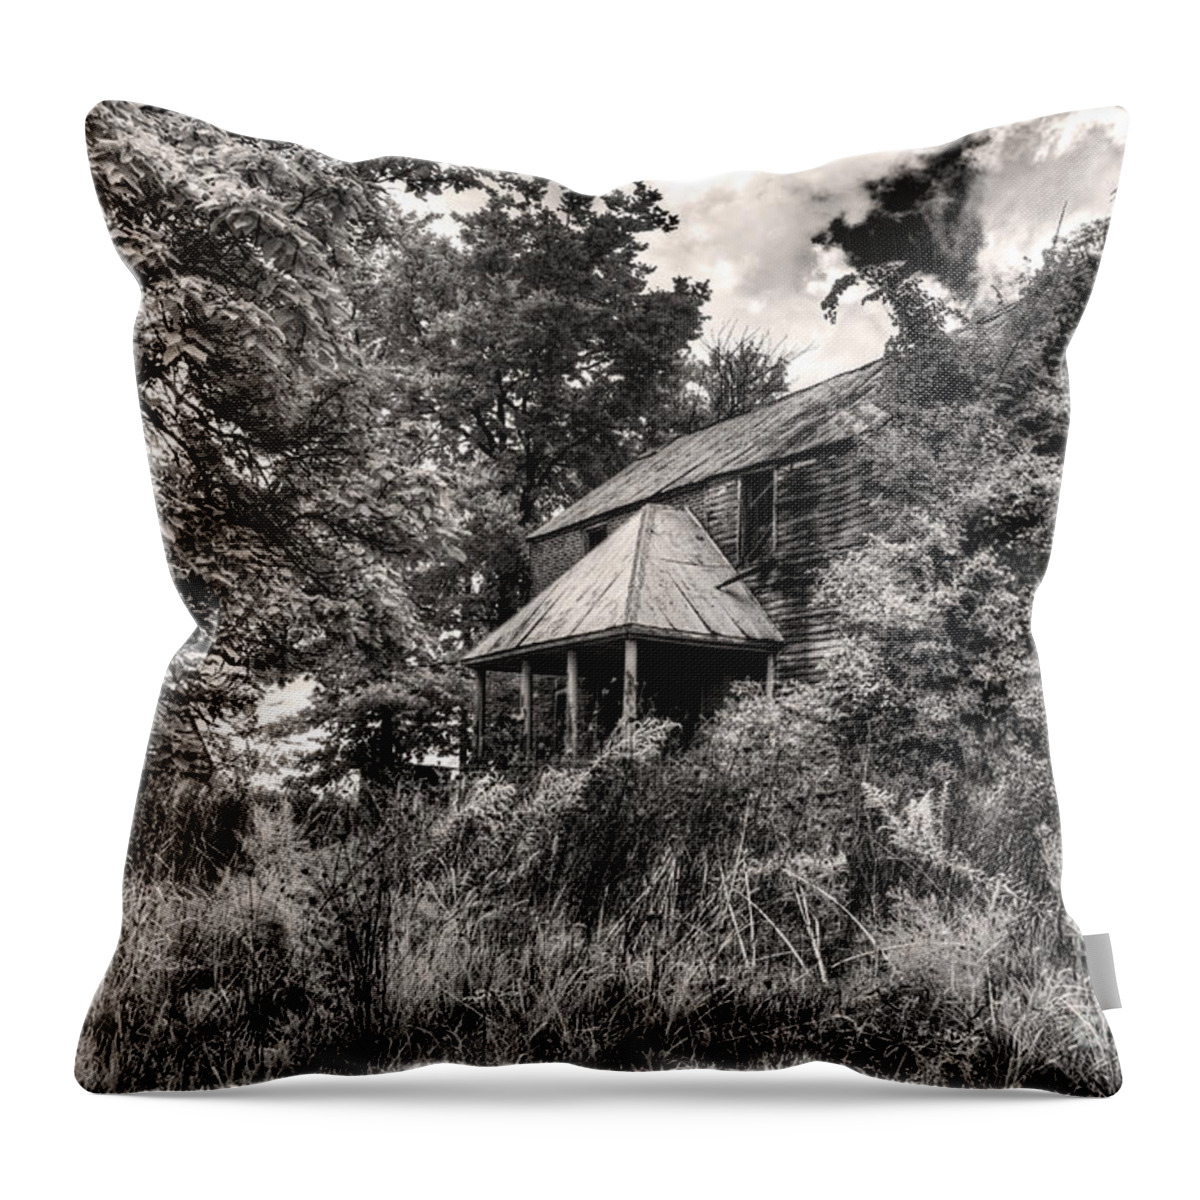 The Old Folks Are Gone Now Throw Pillow featuring the digital art The Old Folks Are Gone Now by William Fields